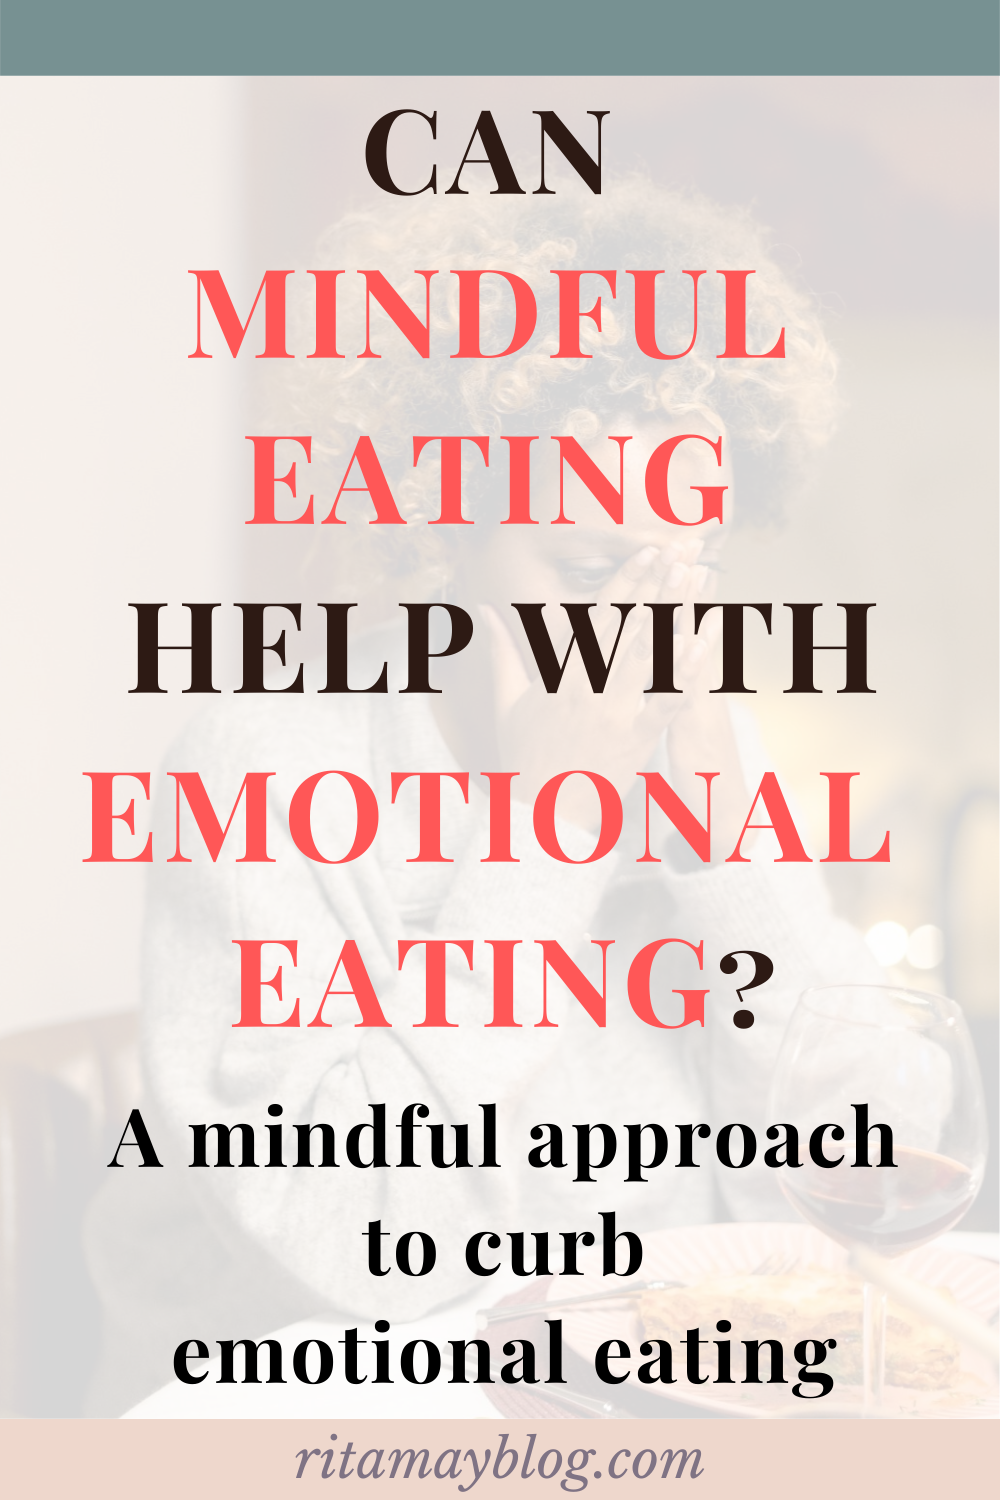 Can mindful eating help with emotional eating